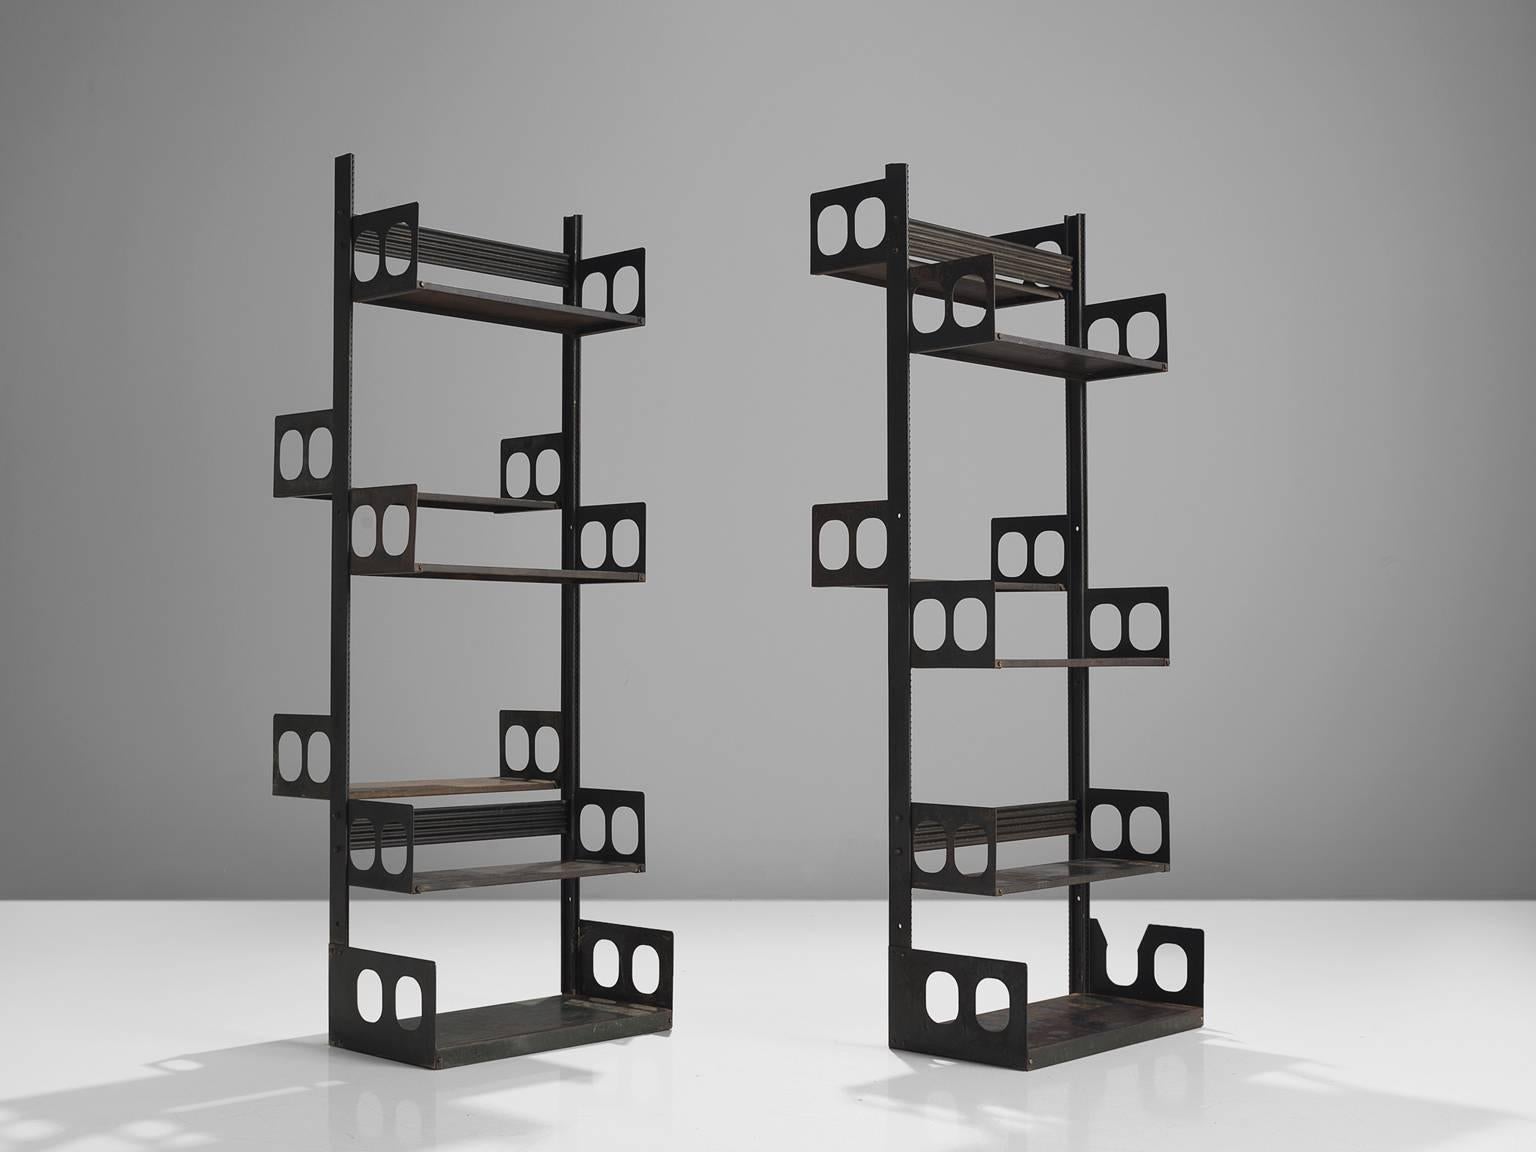 Lips Vago, pair of deep green bookcases, metal, Italy, 1954.

This early variant of the ‘Congresso’ shelf is a modest and strong bookcase made out of steel sheets with holes on the sides creating a strong graphic pattern. This early model has been